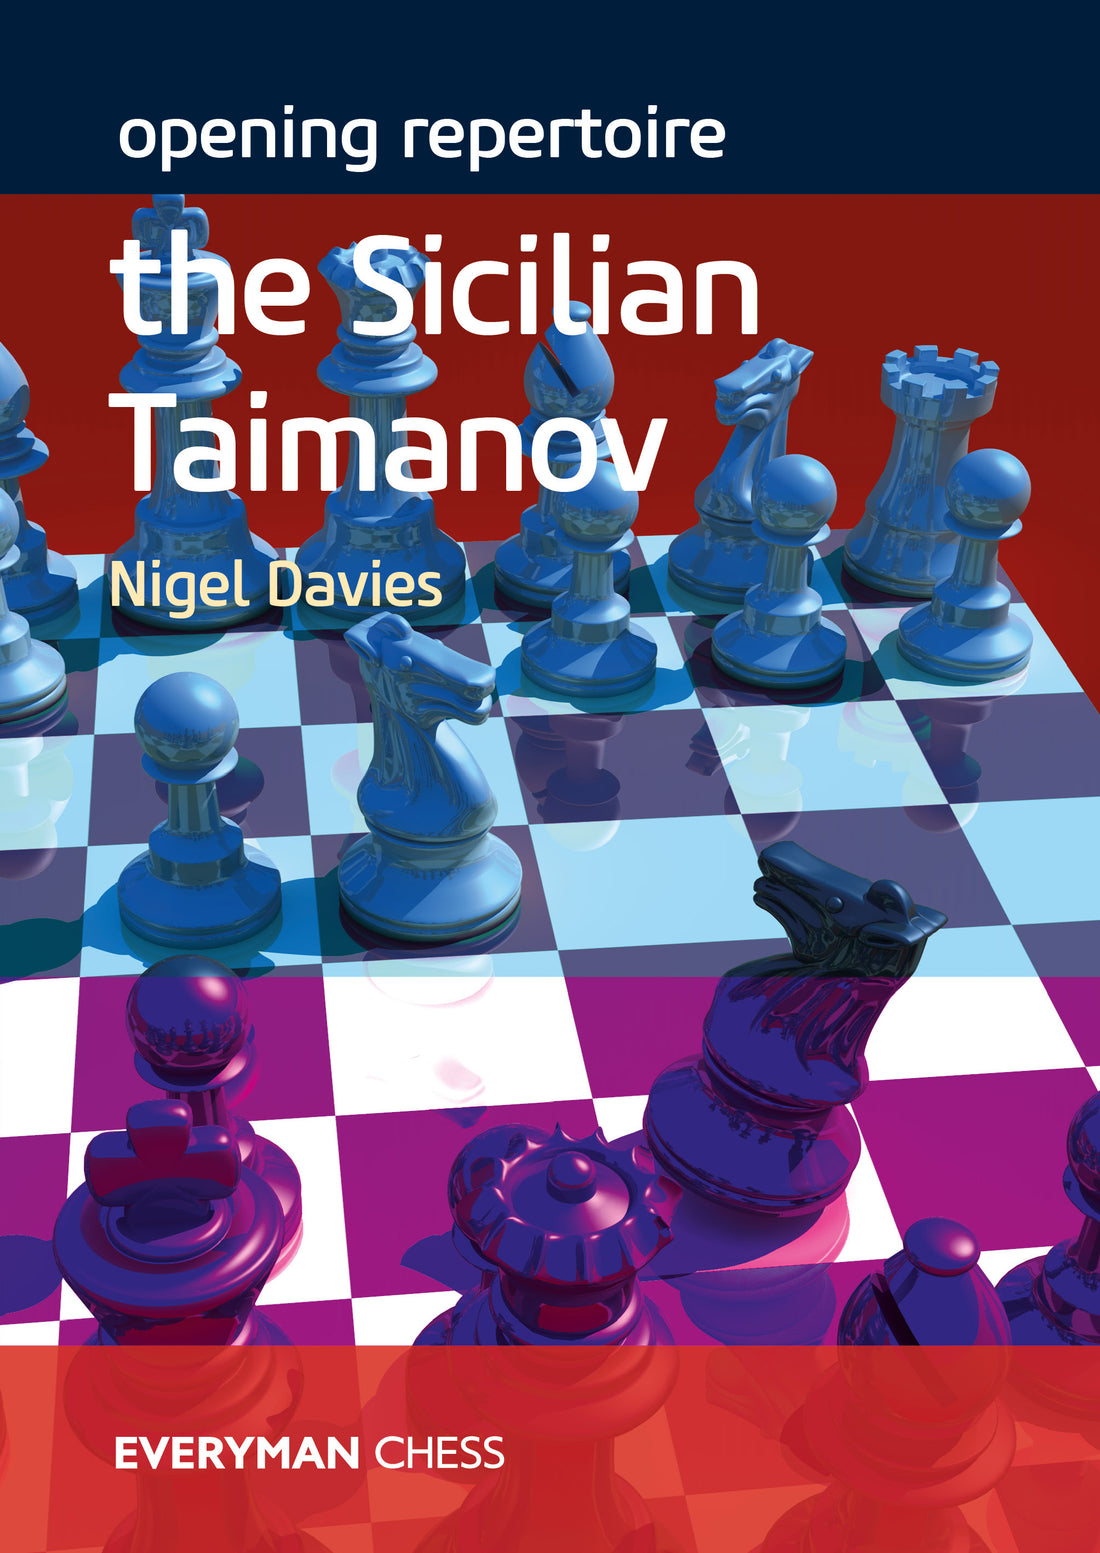 Tactics in the chess opening - PDF Free Download